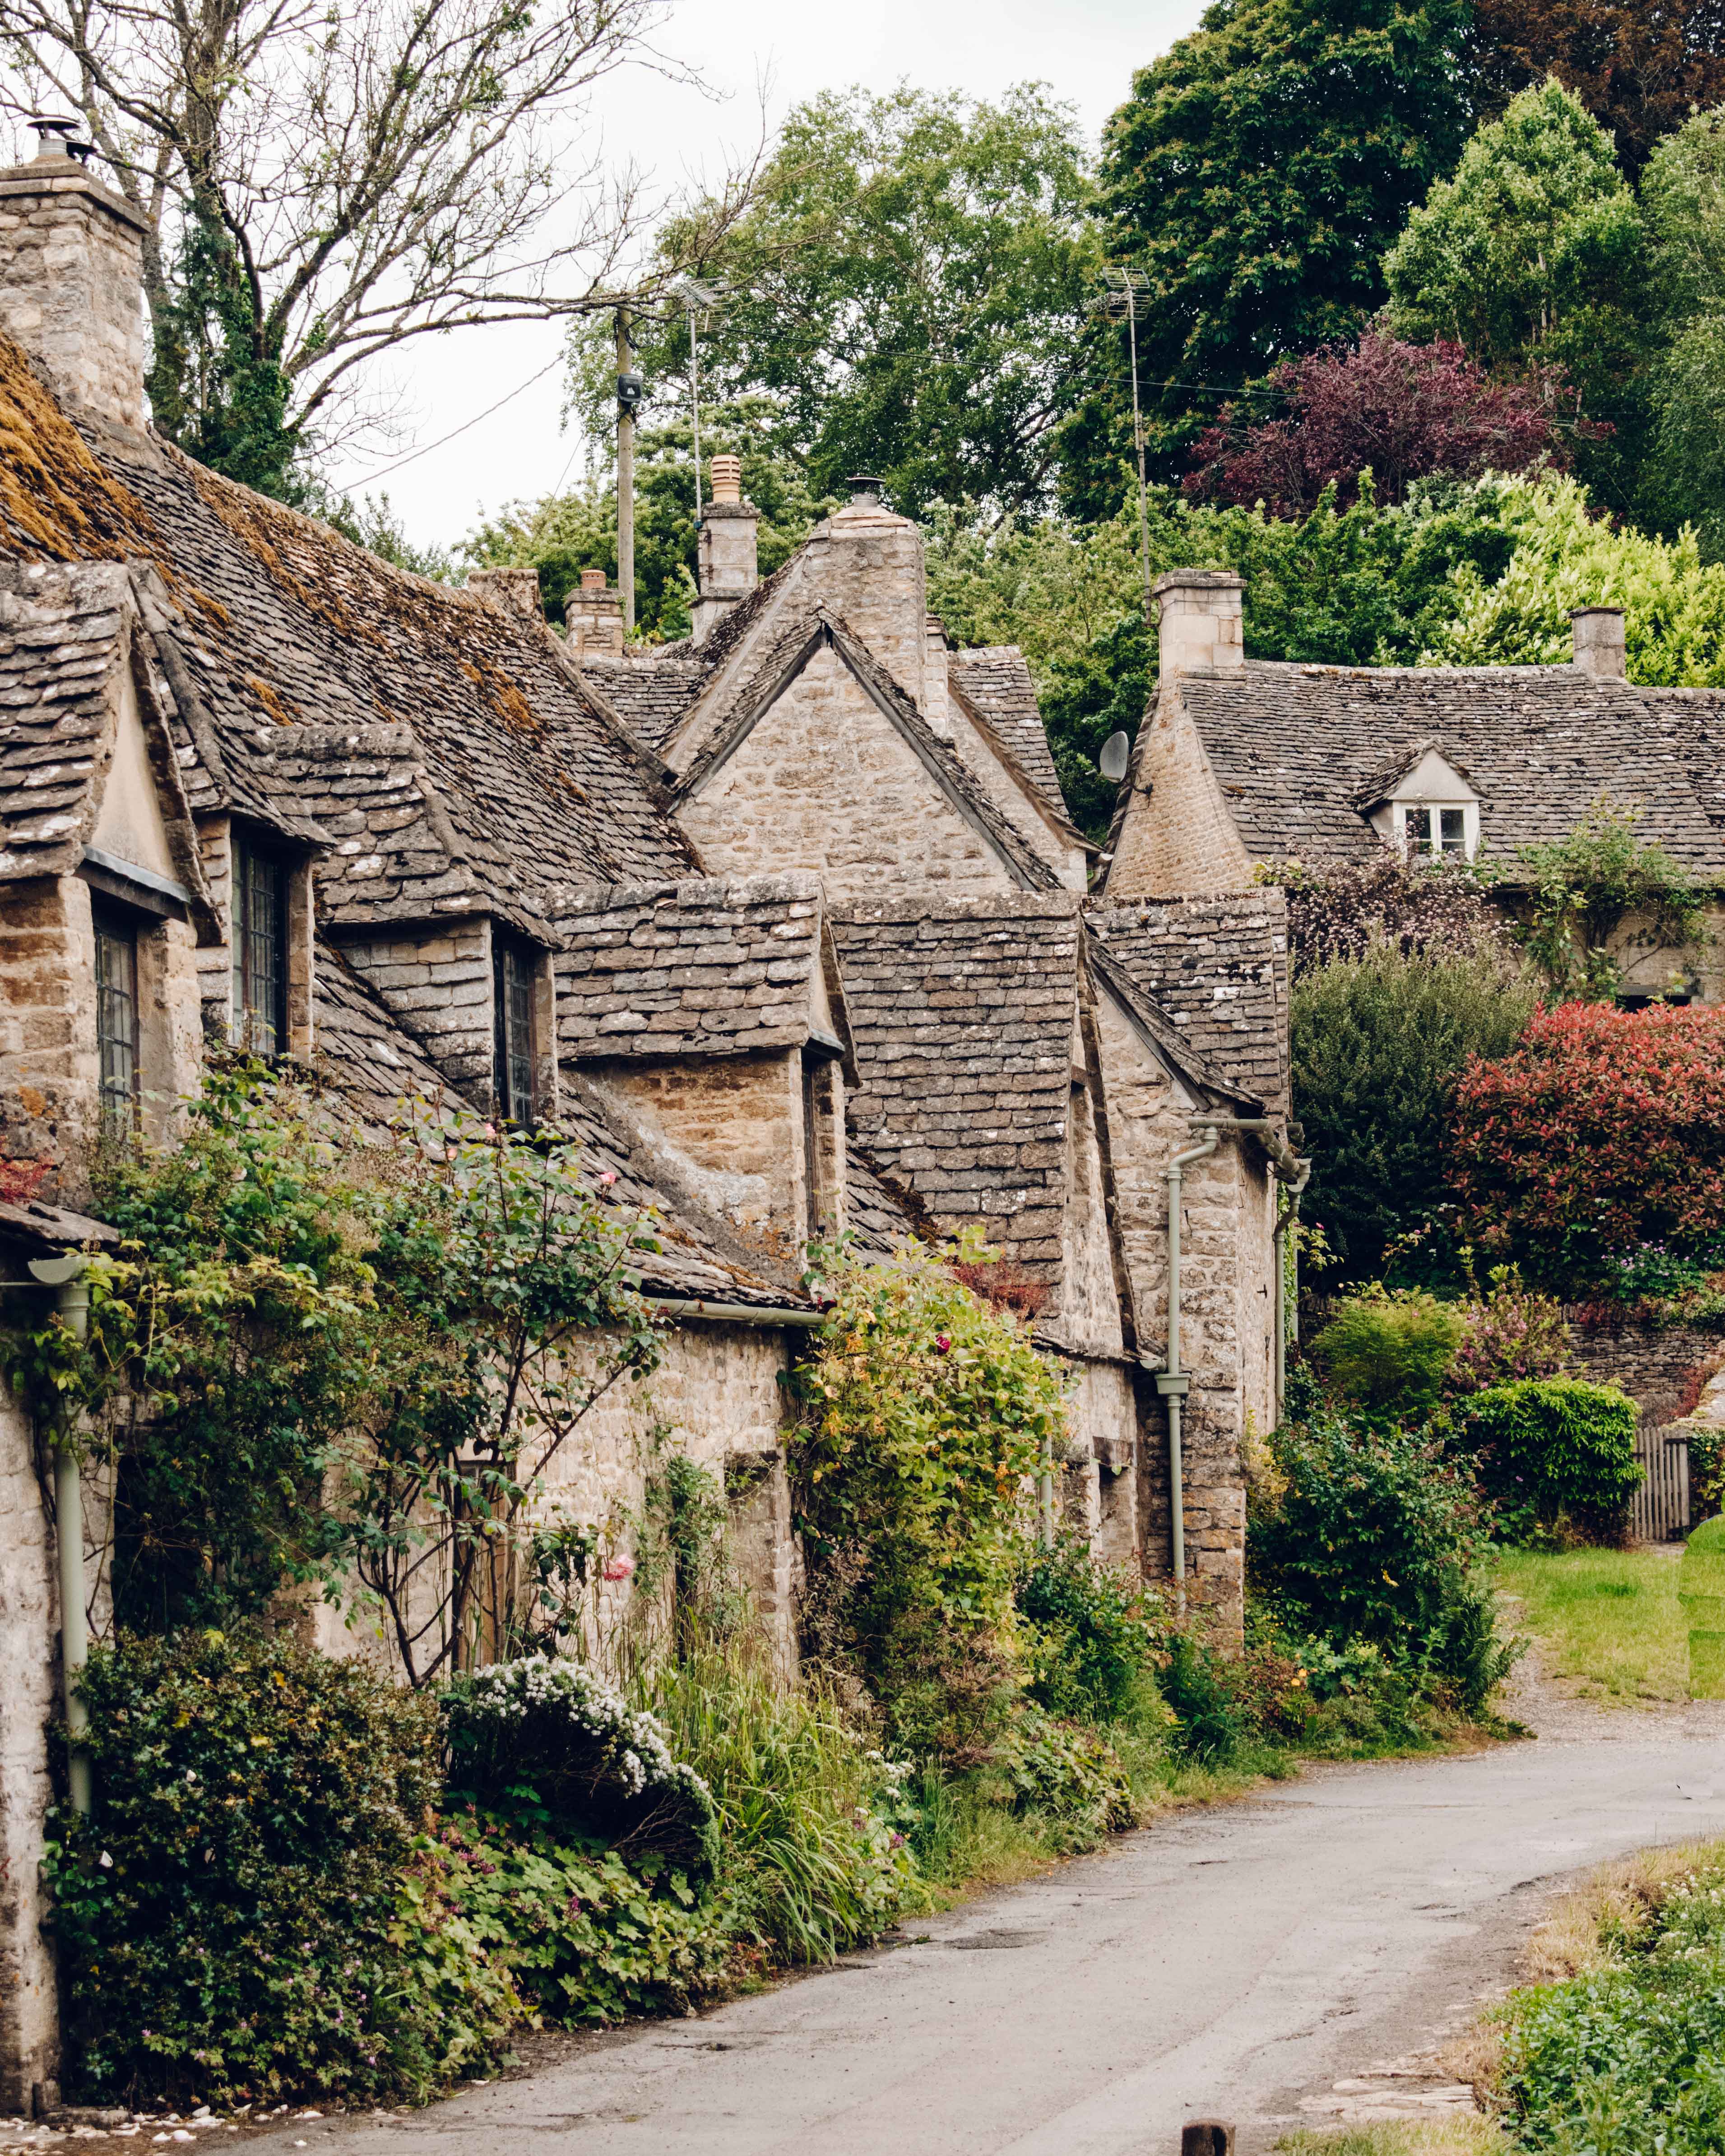 Cotswolds cottages on Arlington Row in Bibury.